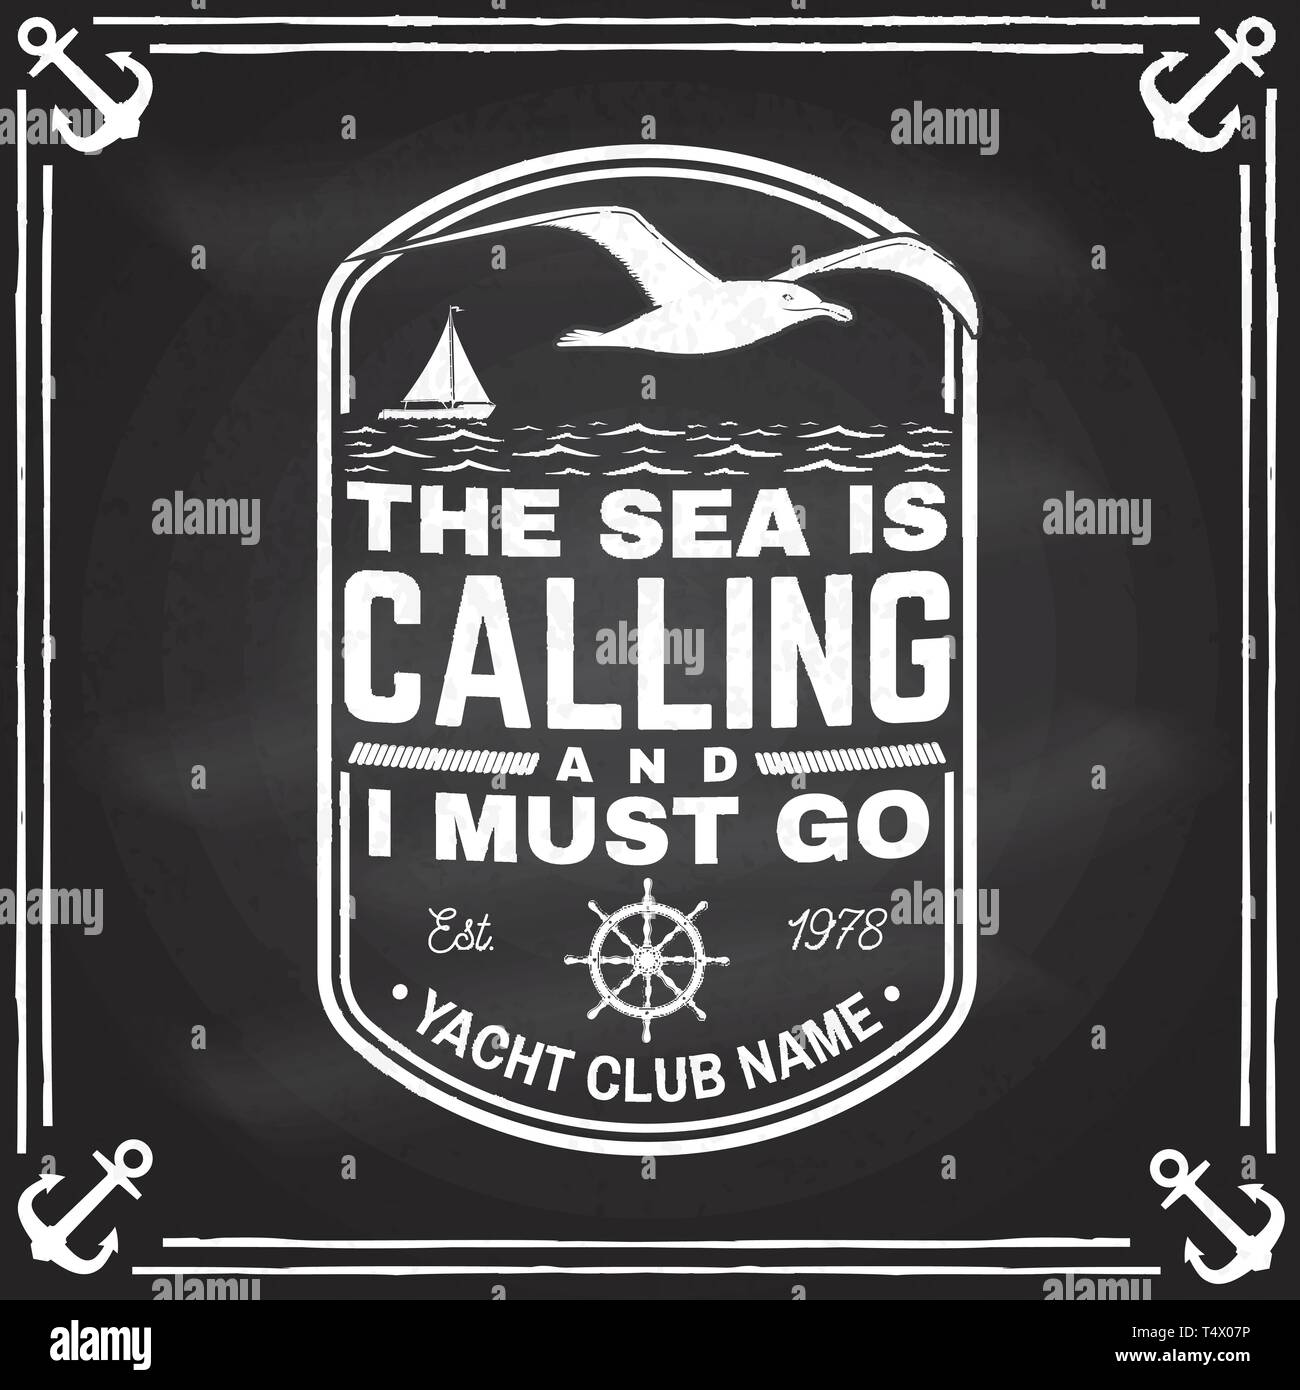 Yacht club badge. Vector illustration on the chalkboard Concept for shirt, print, stamp or tee. Design with steering hand wheel ship, gull and sailing boat silhouette. The sea is calling and i must go Stock Vector